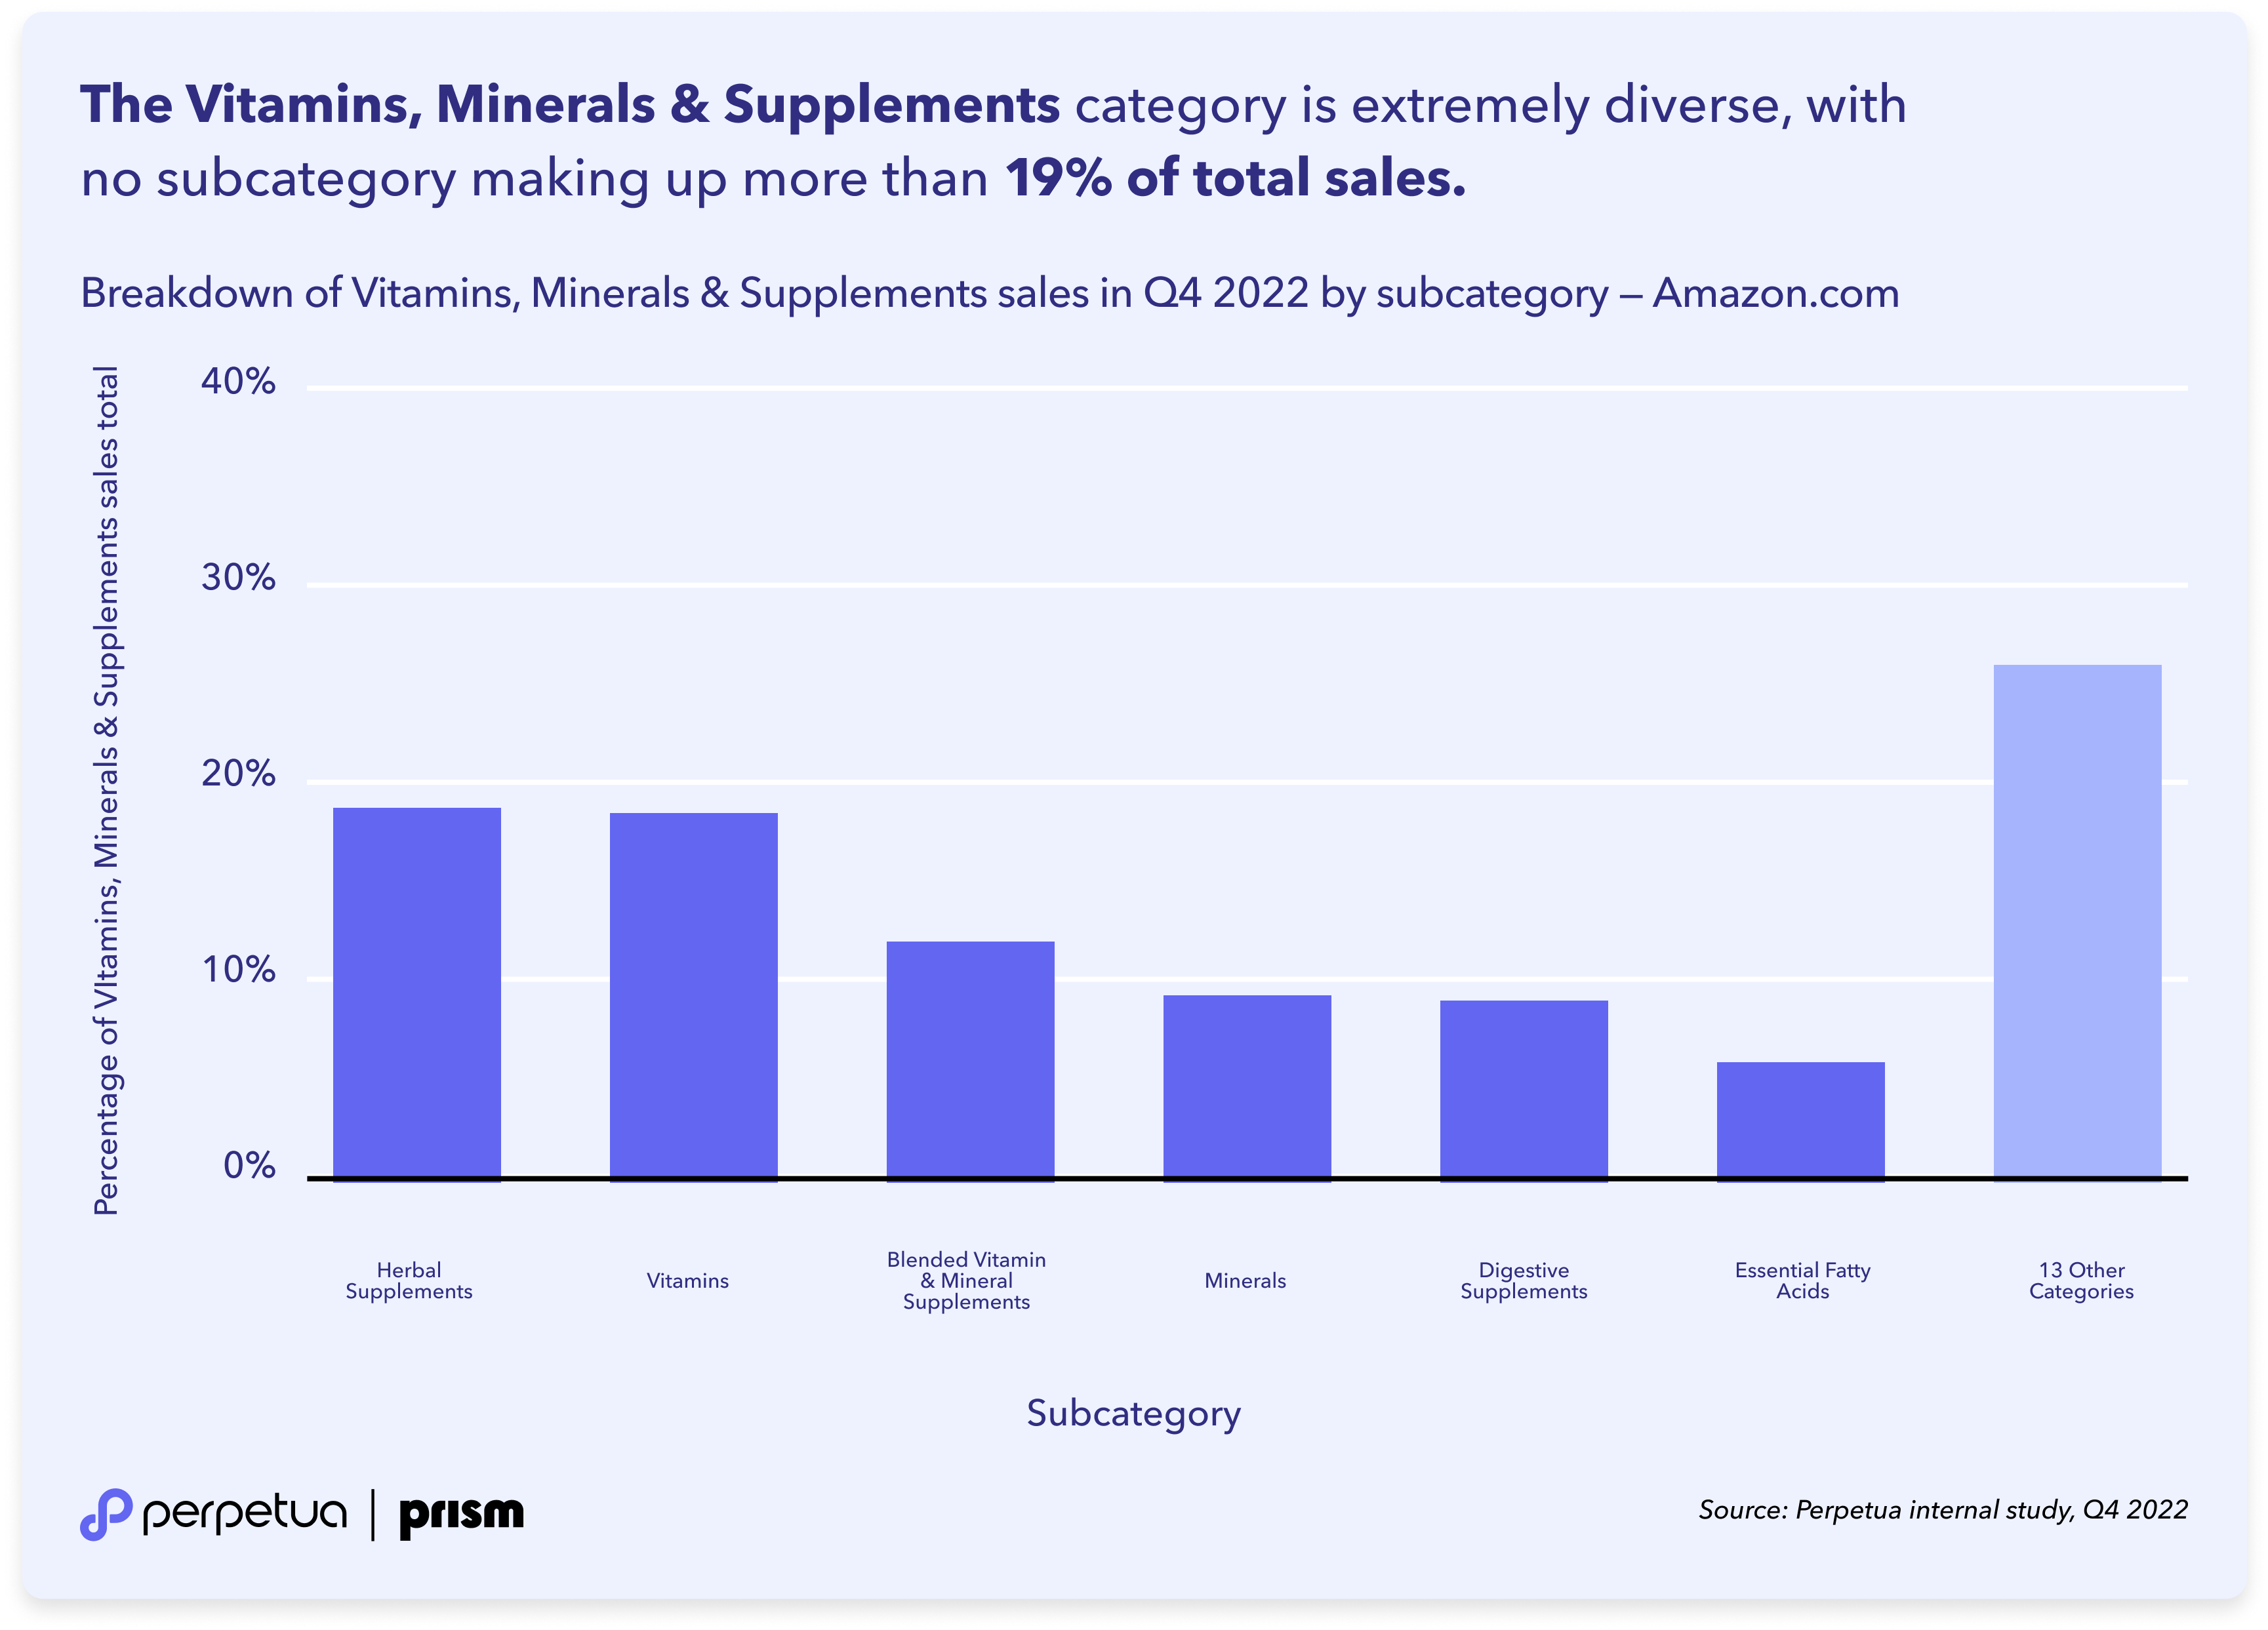 8-Perpetua Prism — The Vitamins, Minerals & Supplements category is extremely diverse, with no subcategory making up more than 19- of total sales